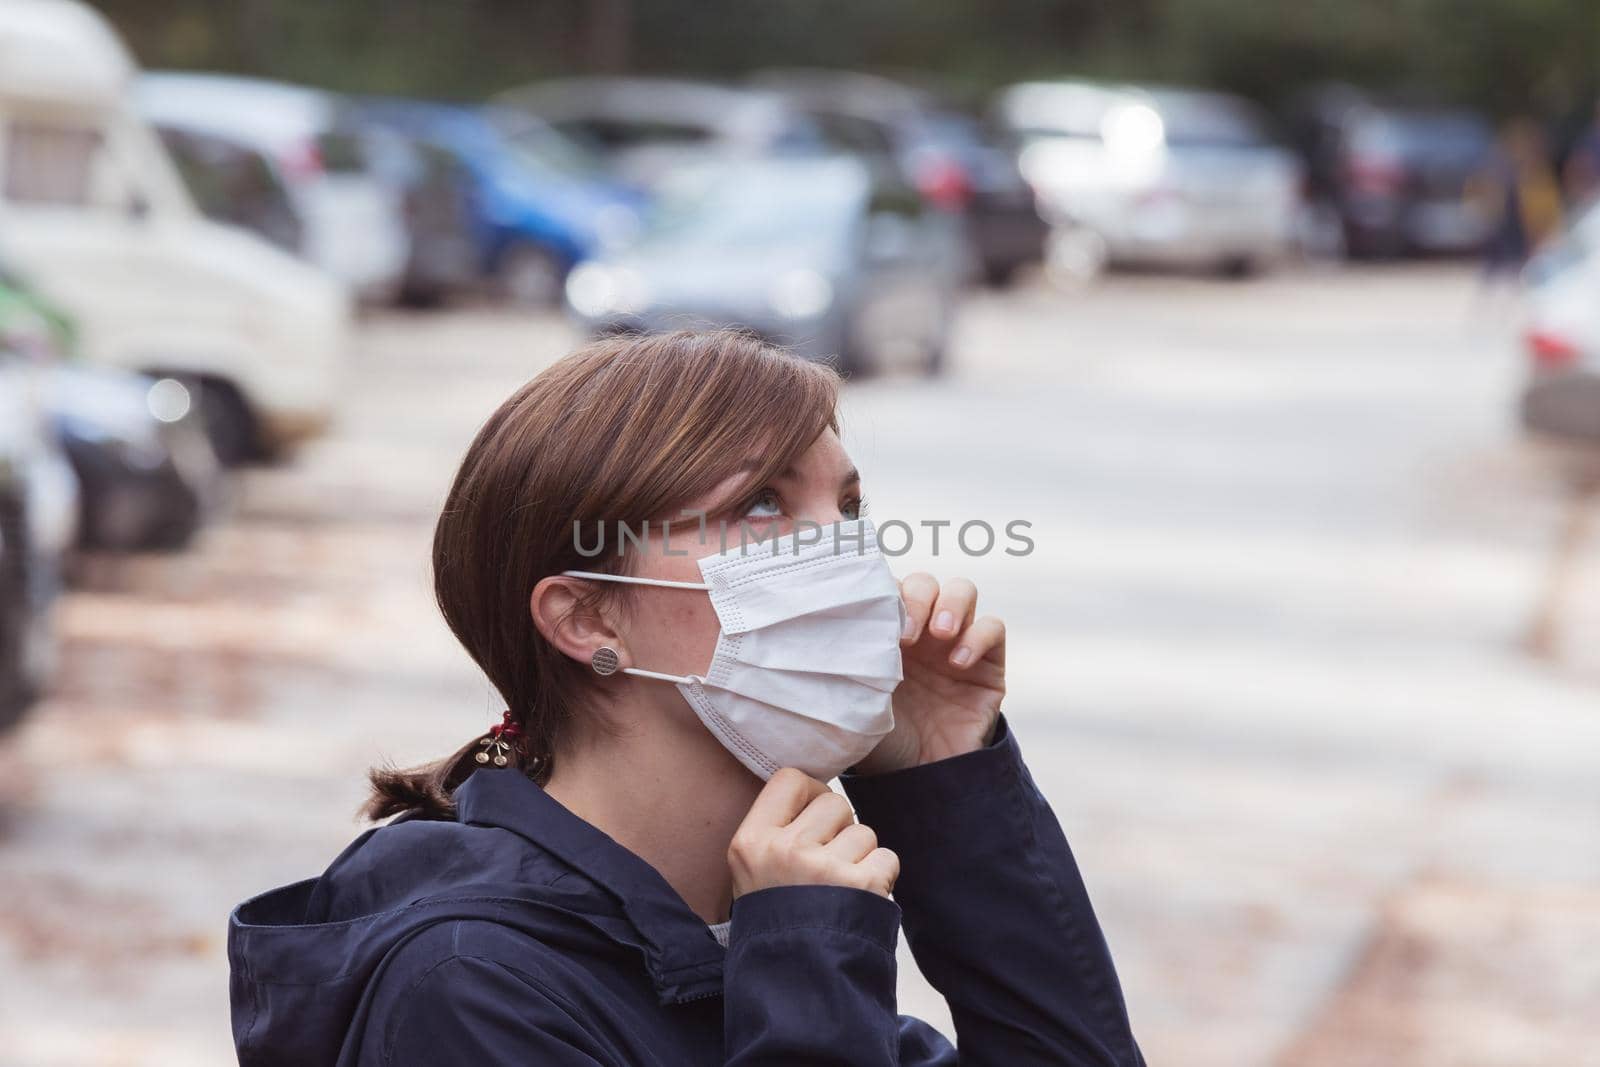 Flue and corona safety concept. Woman putting on face mask to protect herself, outdoors by Daxenbichler